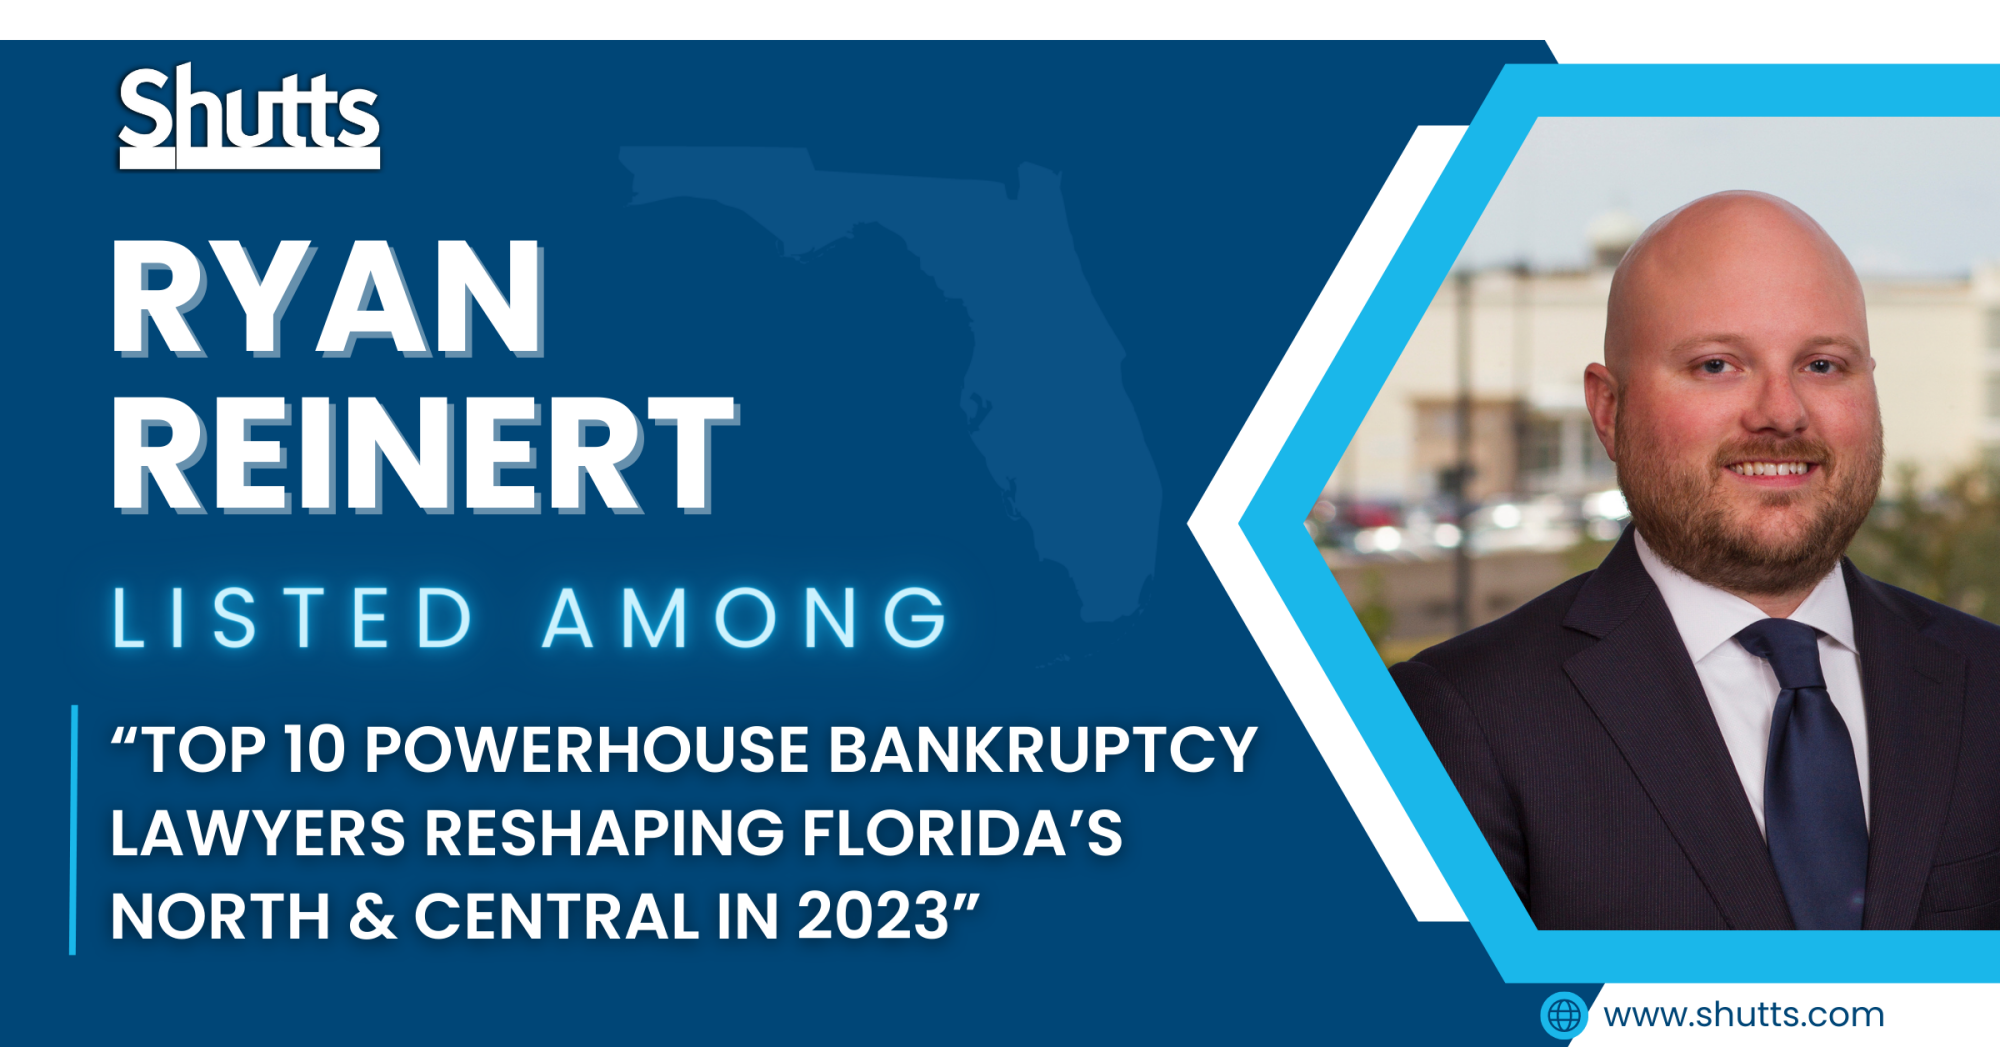 Ryan Reinert Listed among “Top 10 Powerhouse Bankruptcy Lawyers Reshaping Florida’s North & Central in 2023”